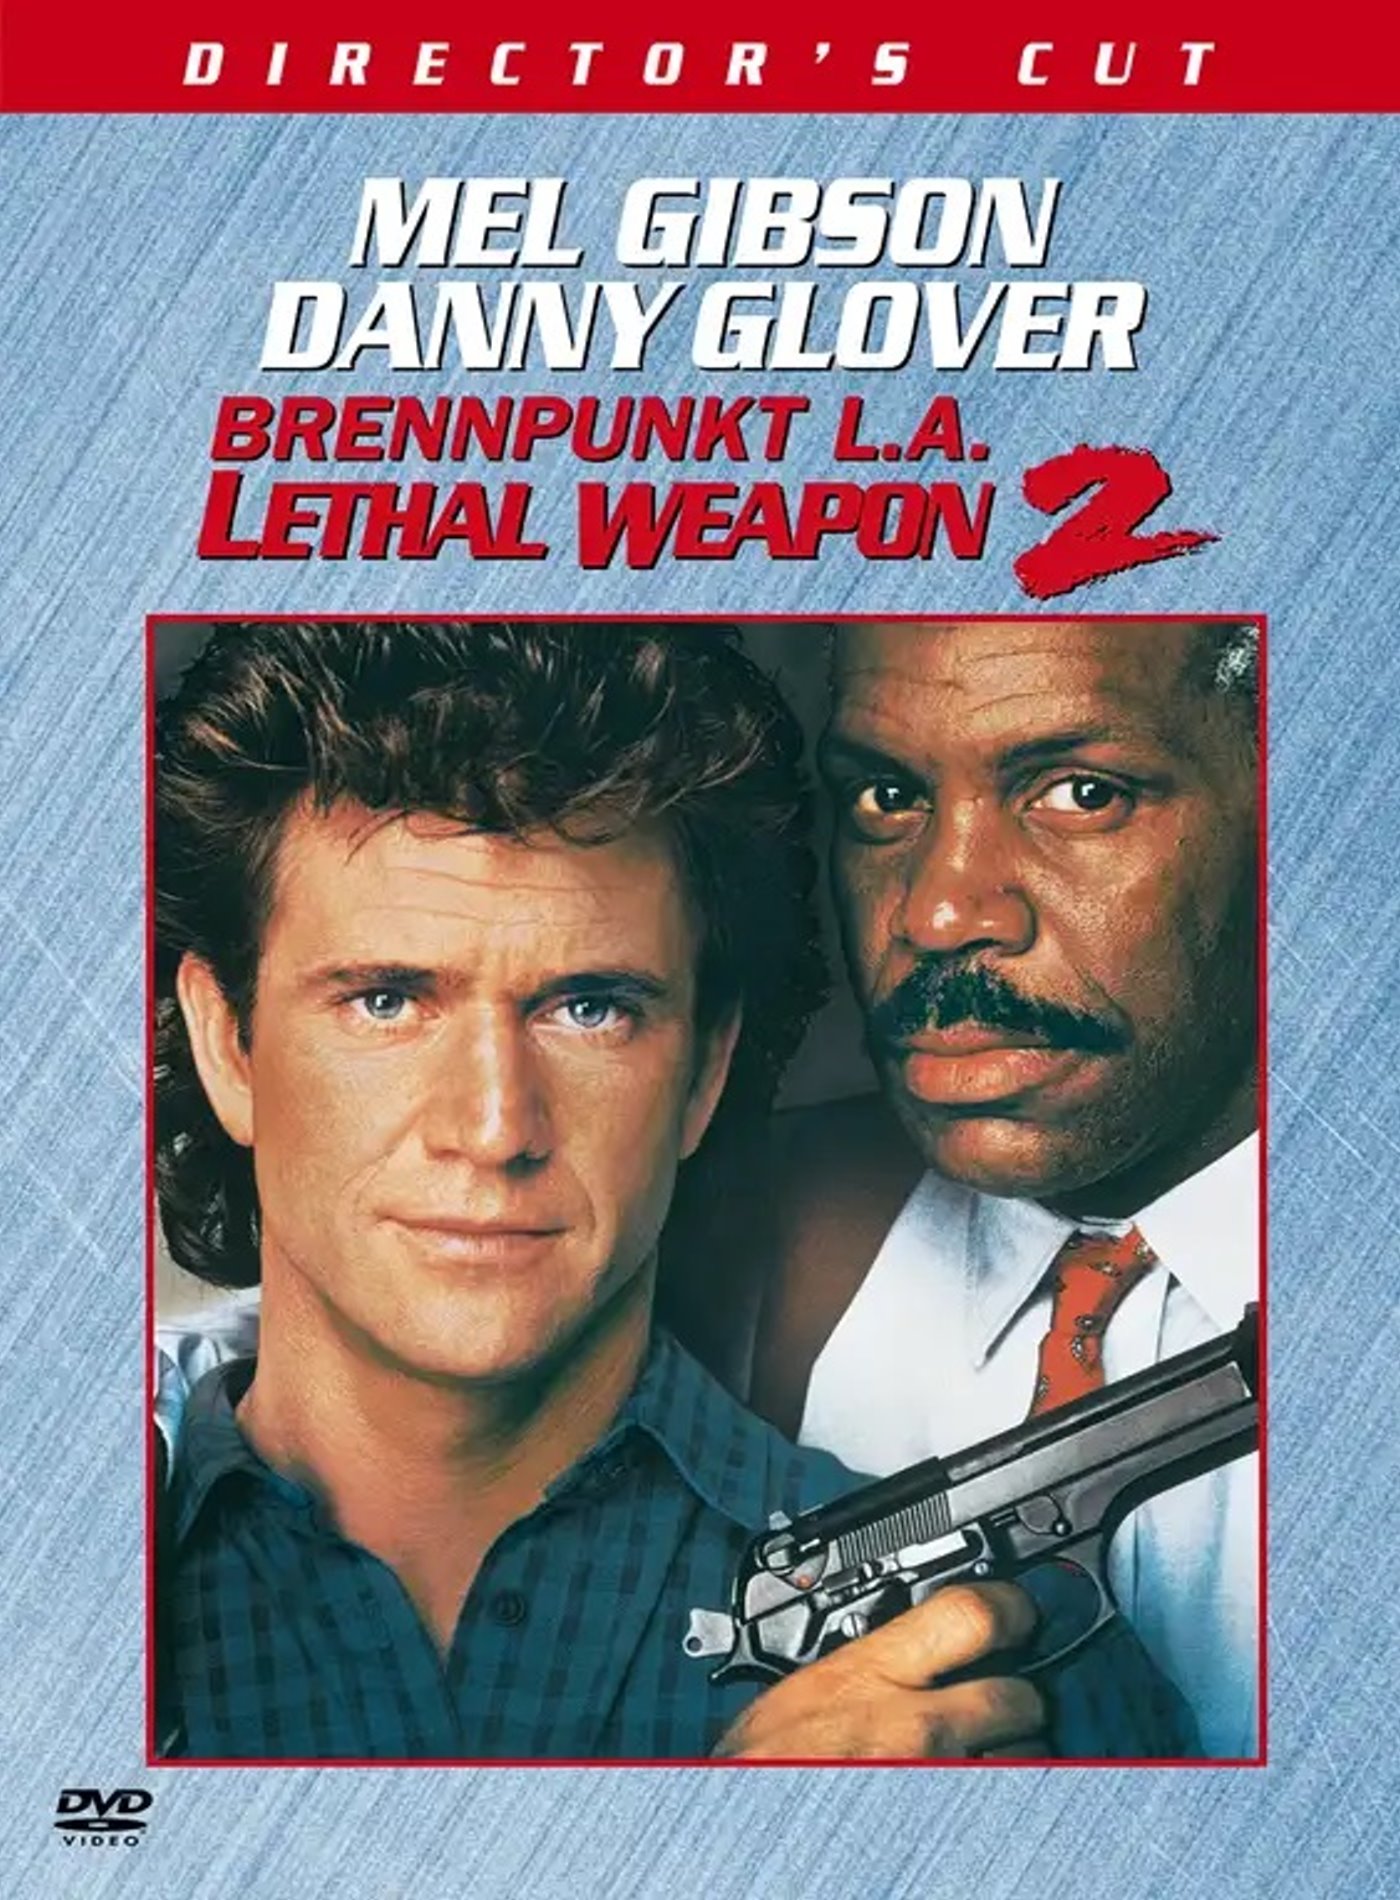 Cover - Lethal Weapon 2 - Brennpunkt L.A..jpg